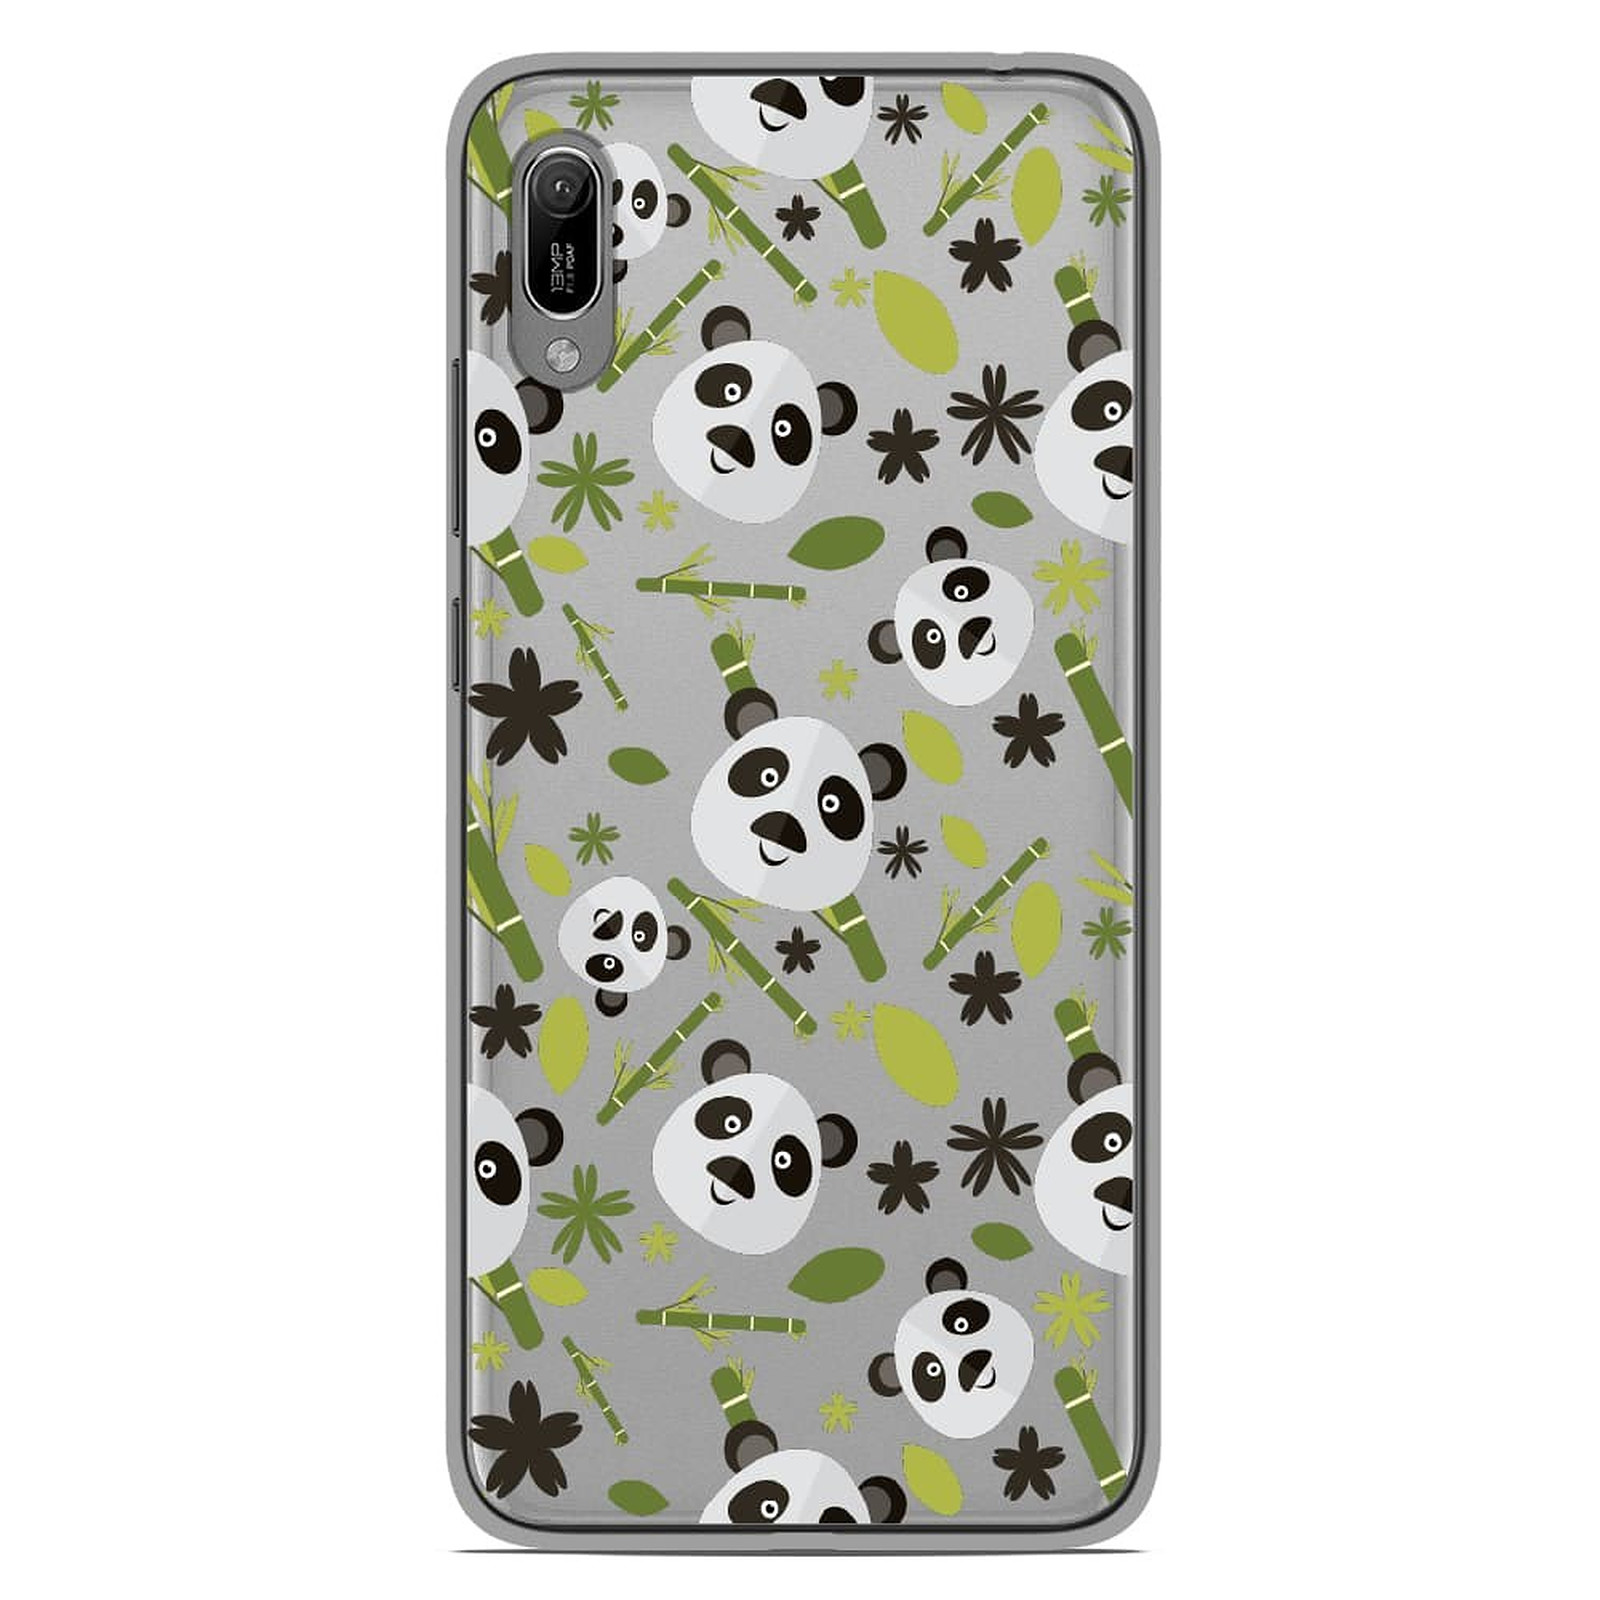 1001 Coques Coque silicone gel Huawei Y6 2019 motif Pandas et Bambou - Coque telephone 1001Coques